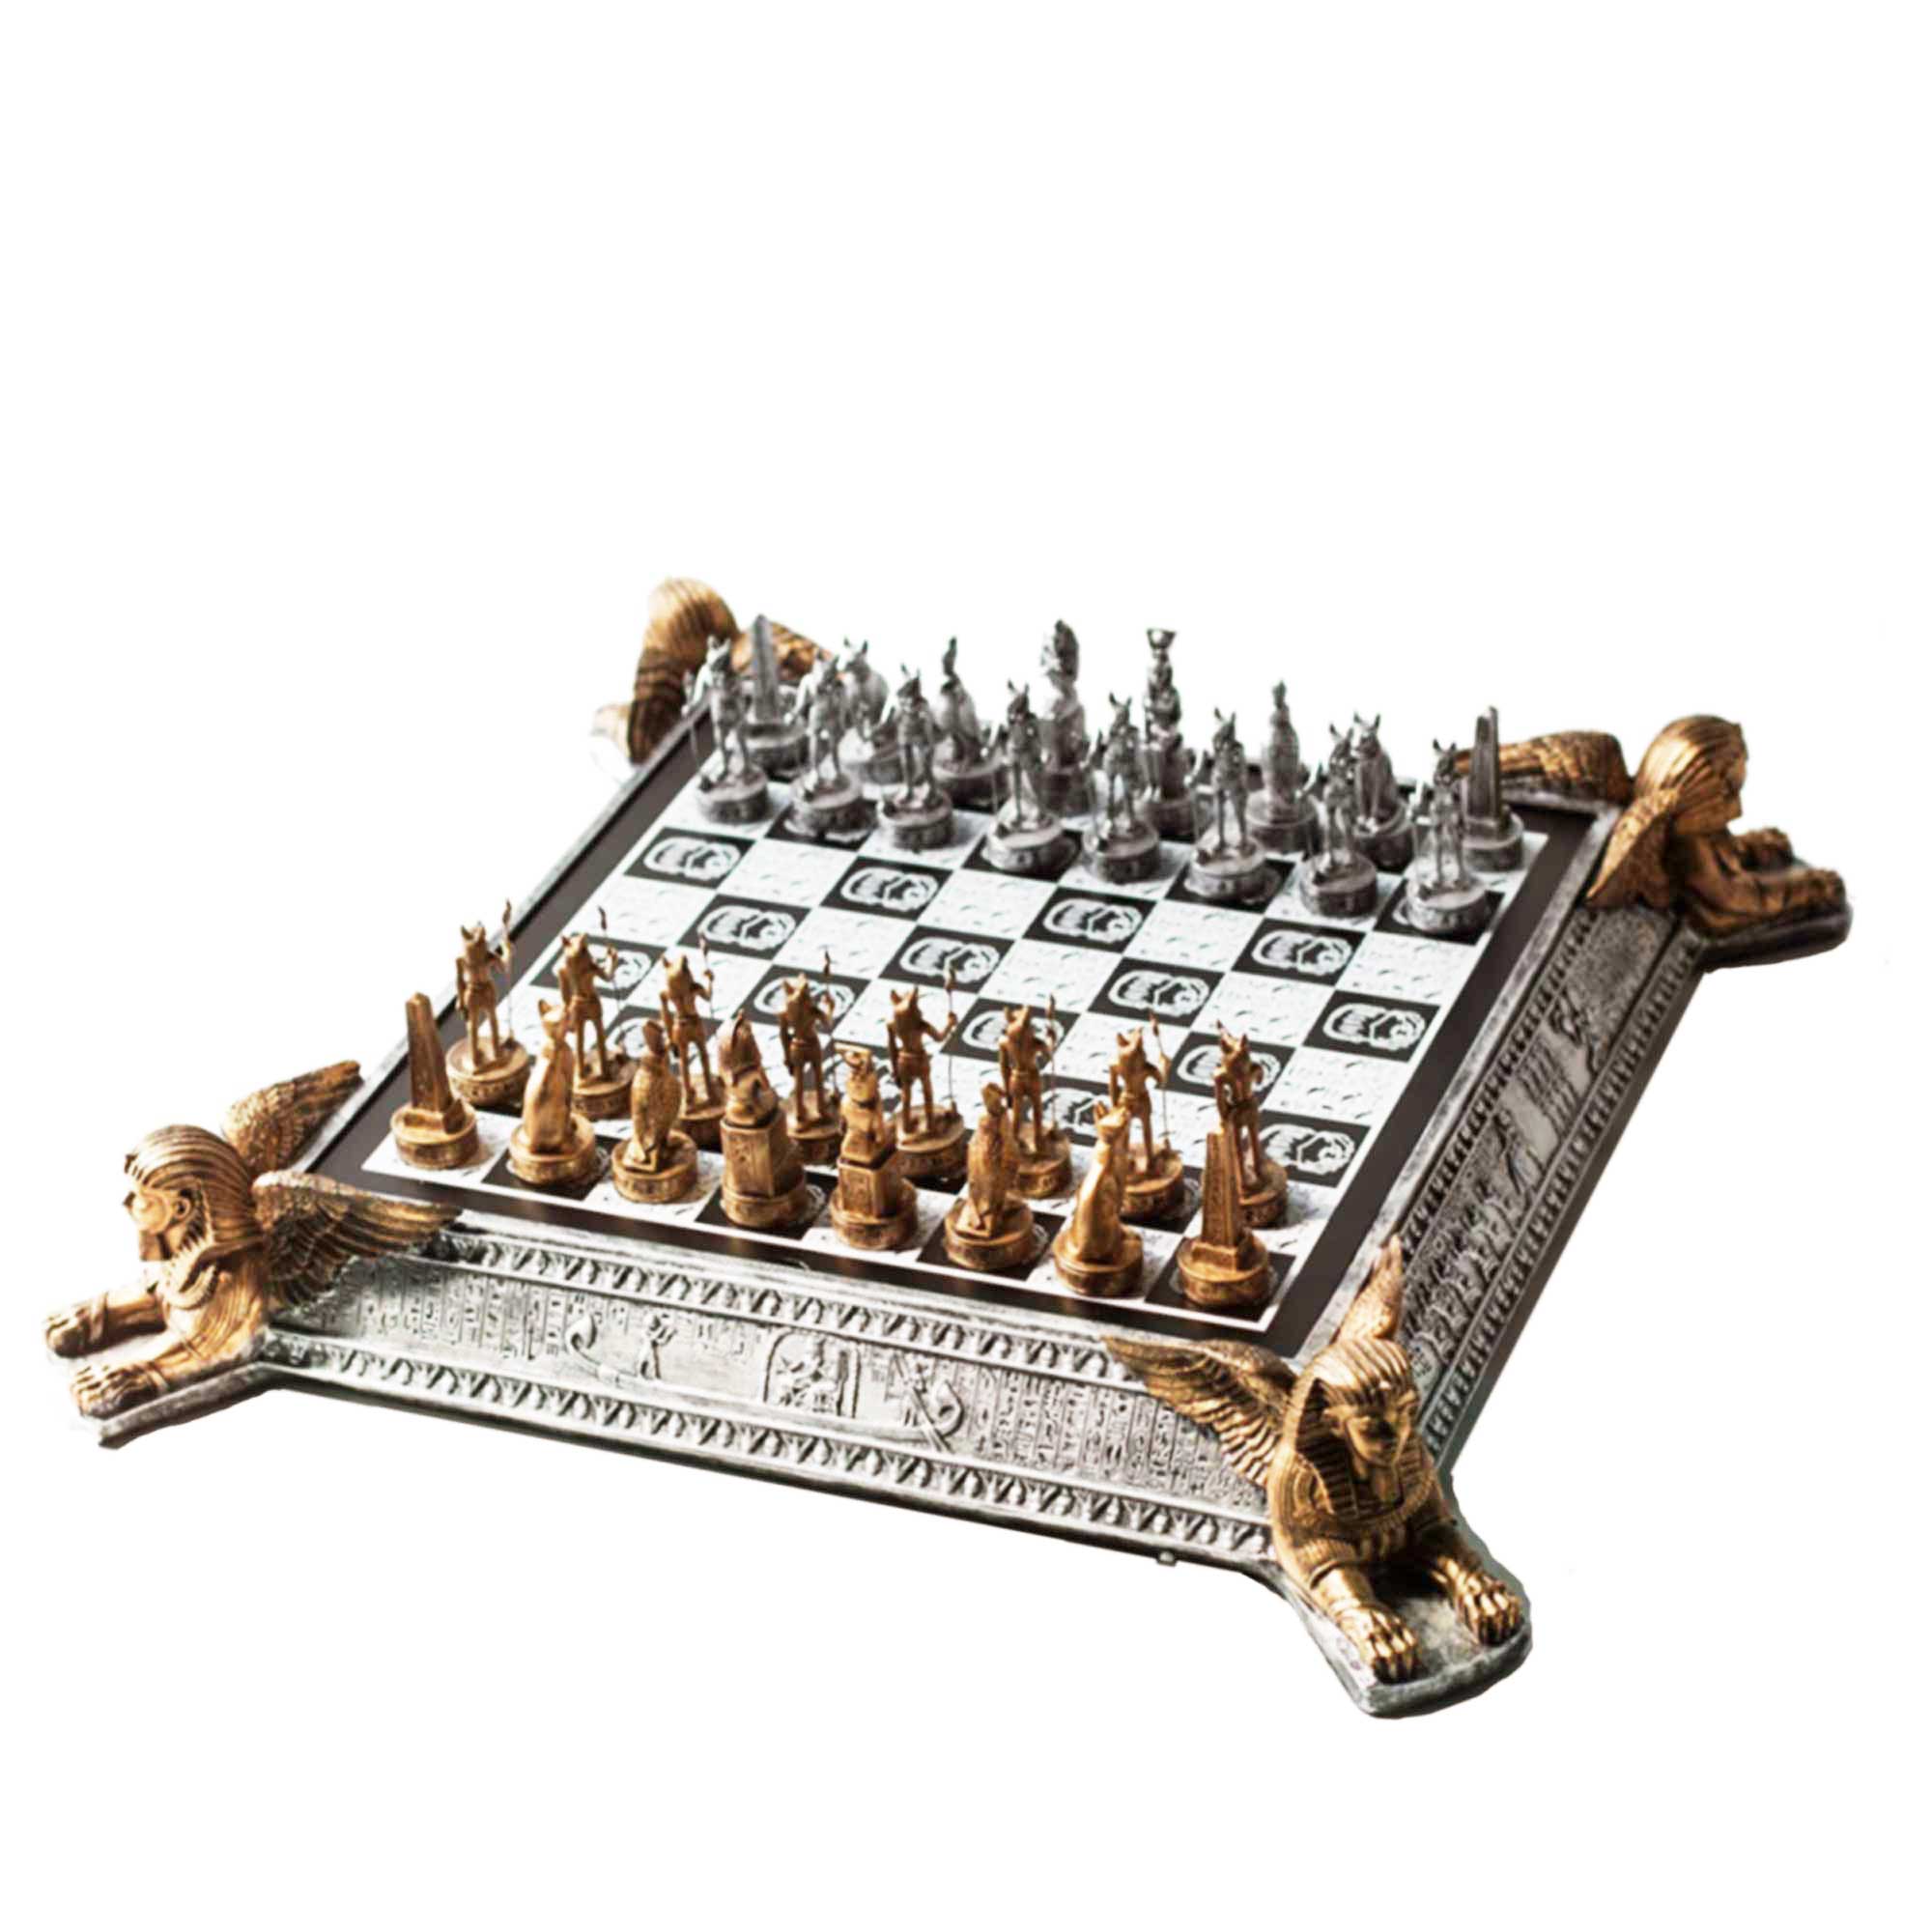 2130-EGYPTIAN-CHESS-SET-Pewter-Chess-Set-with-3D-Theme-Decorative.jpg